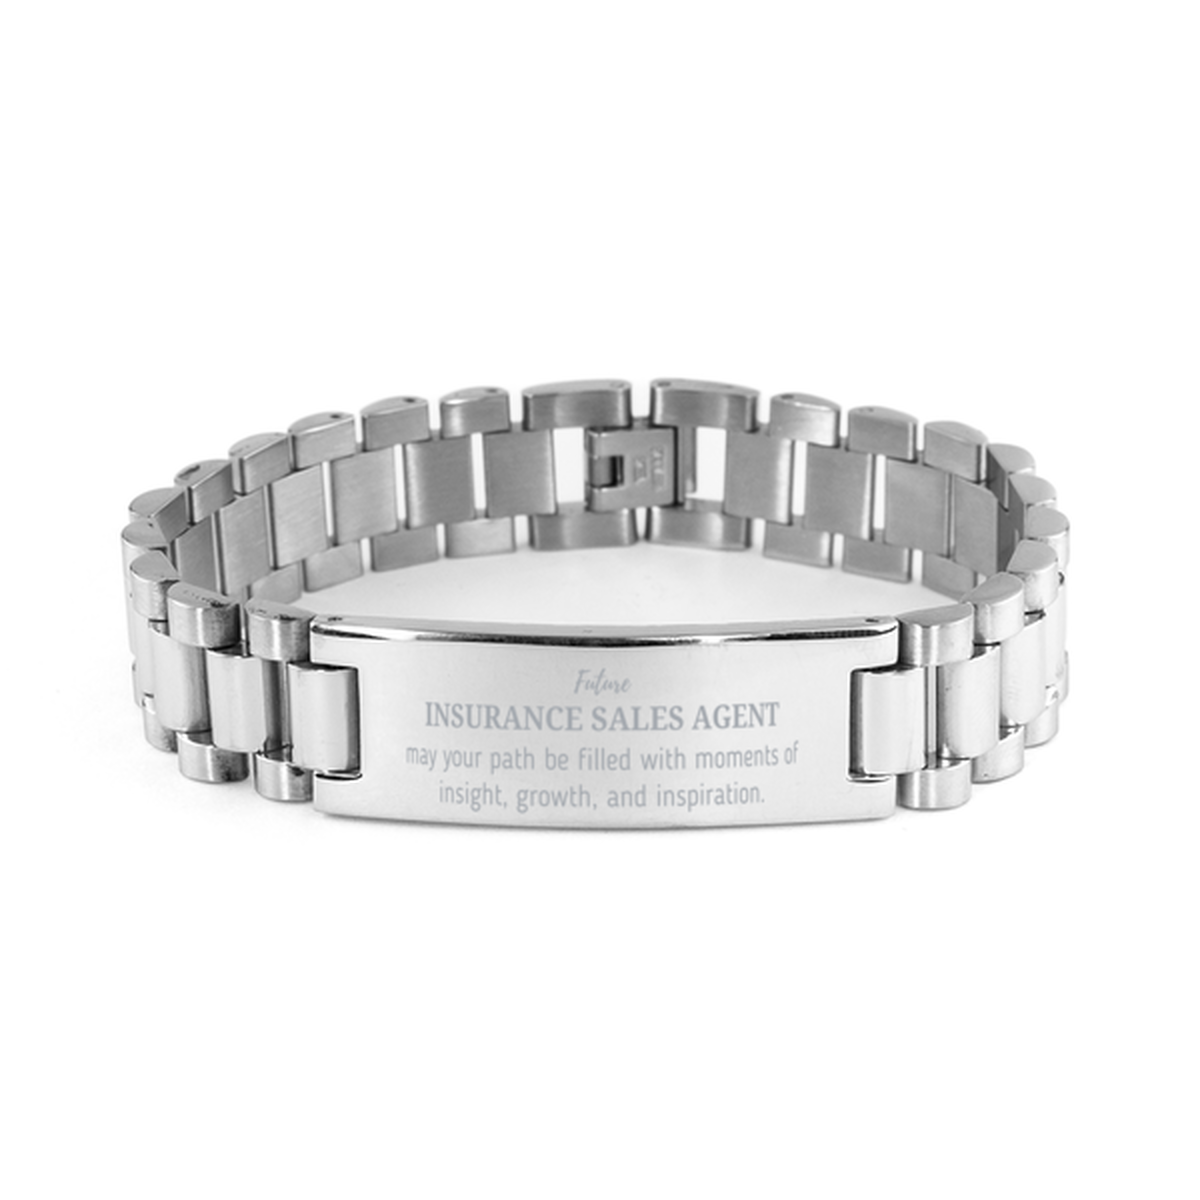 Future Insurance Sales Agent Gifts, May your path be filled with moments of insight, Graduation Gifts for New Insurance Sales Agent, Christmas Unique Ladder Stainless Steel Bracelet For Men, Women, Friends